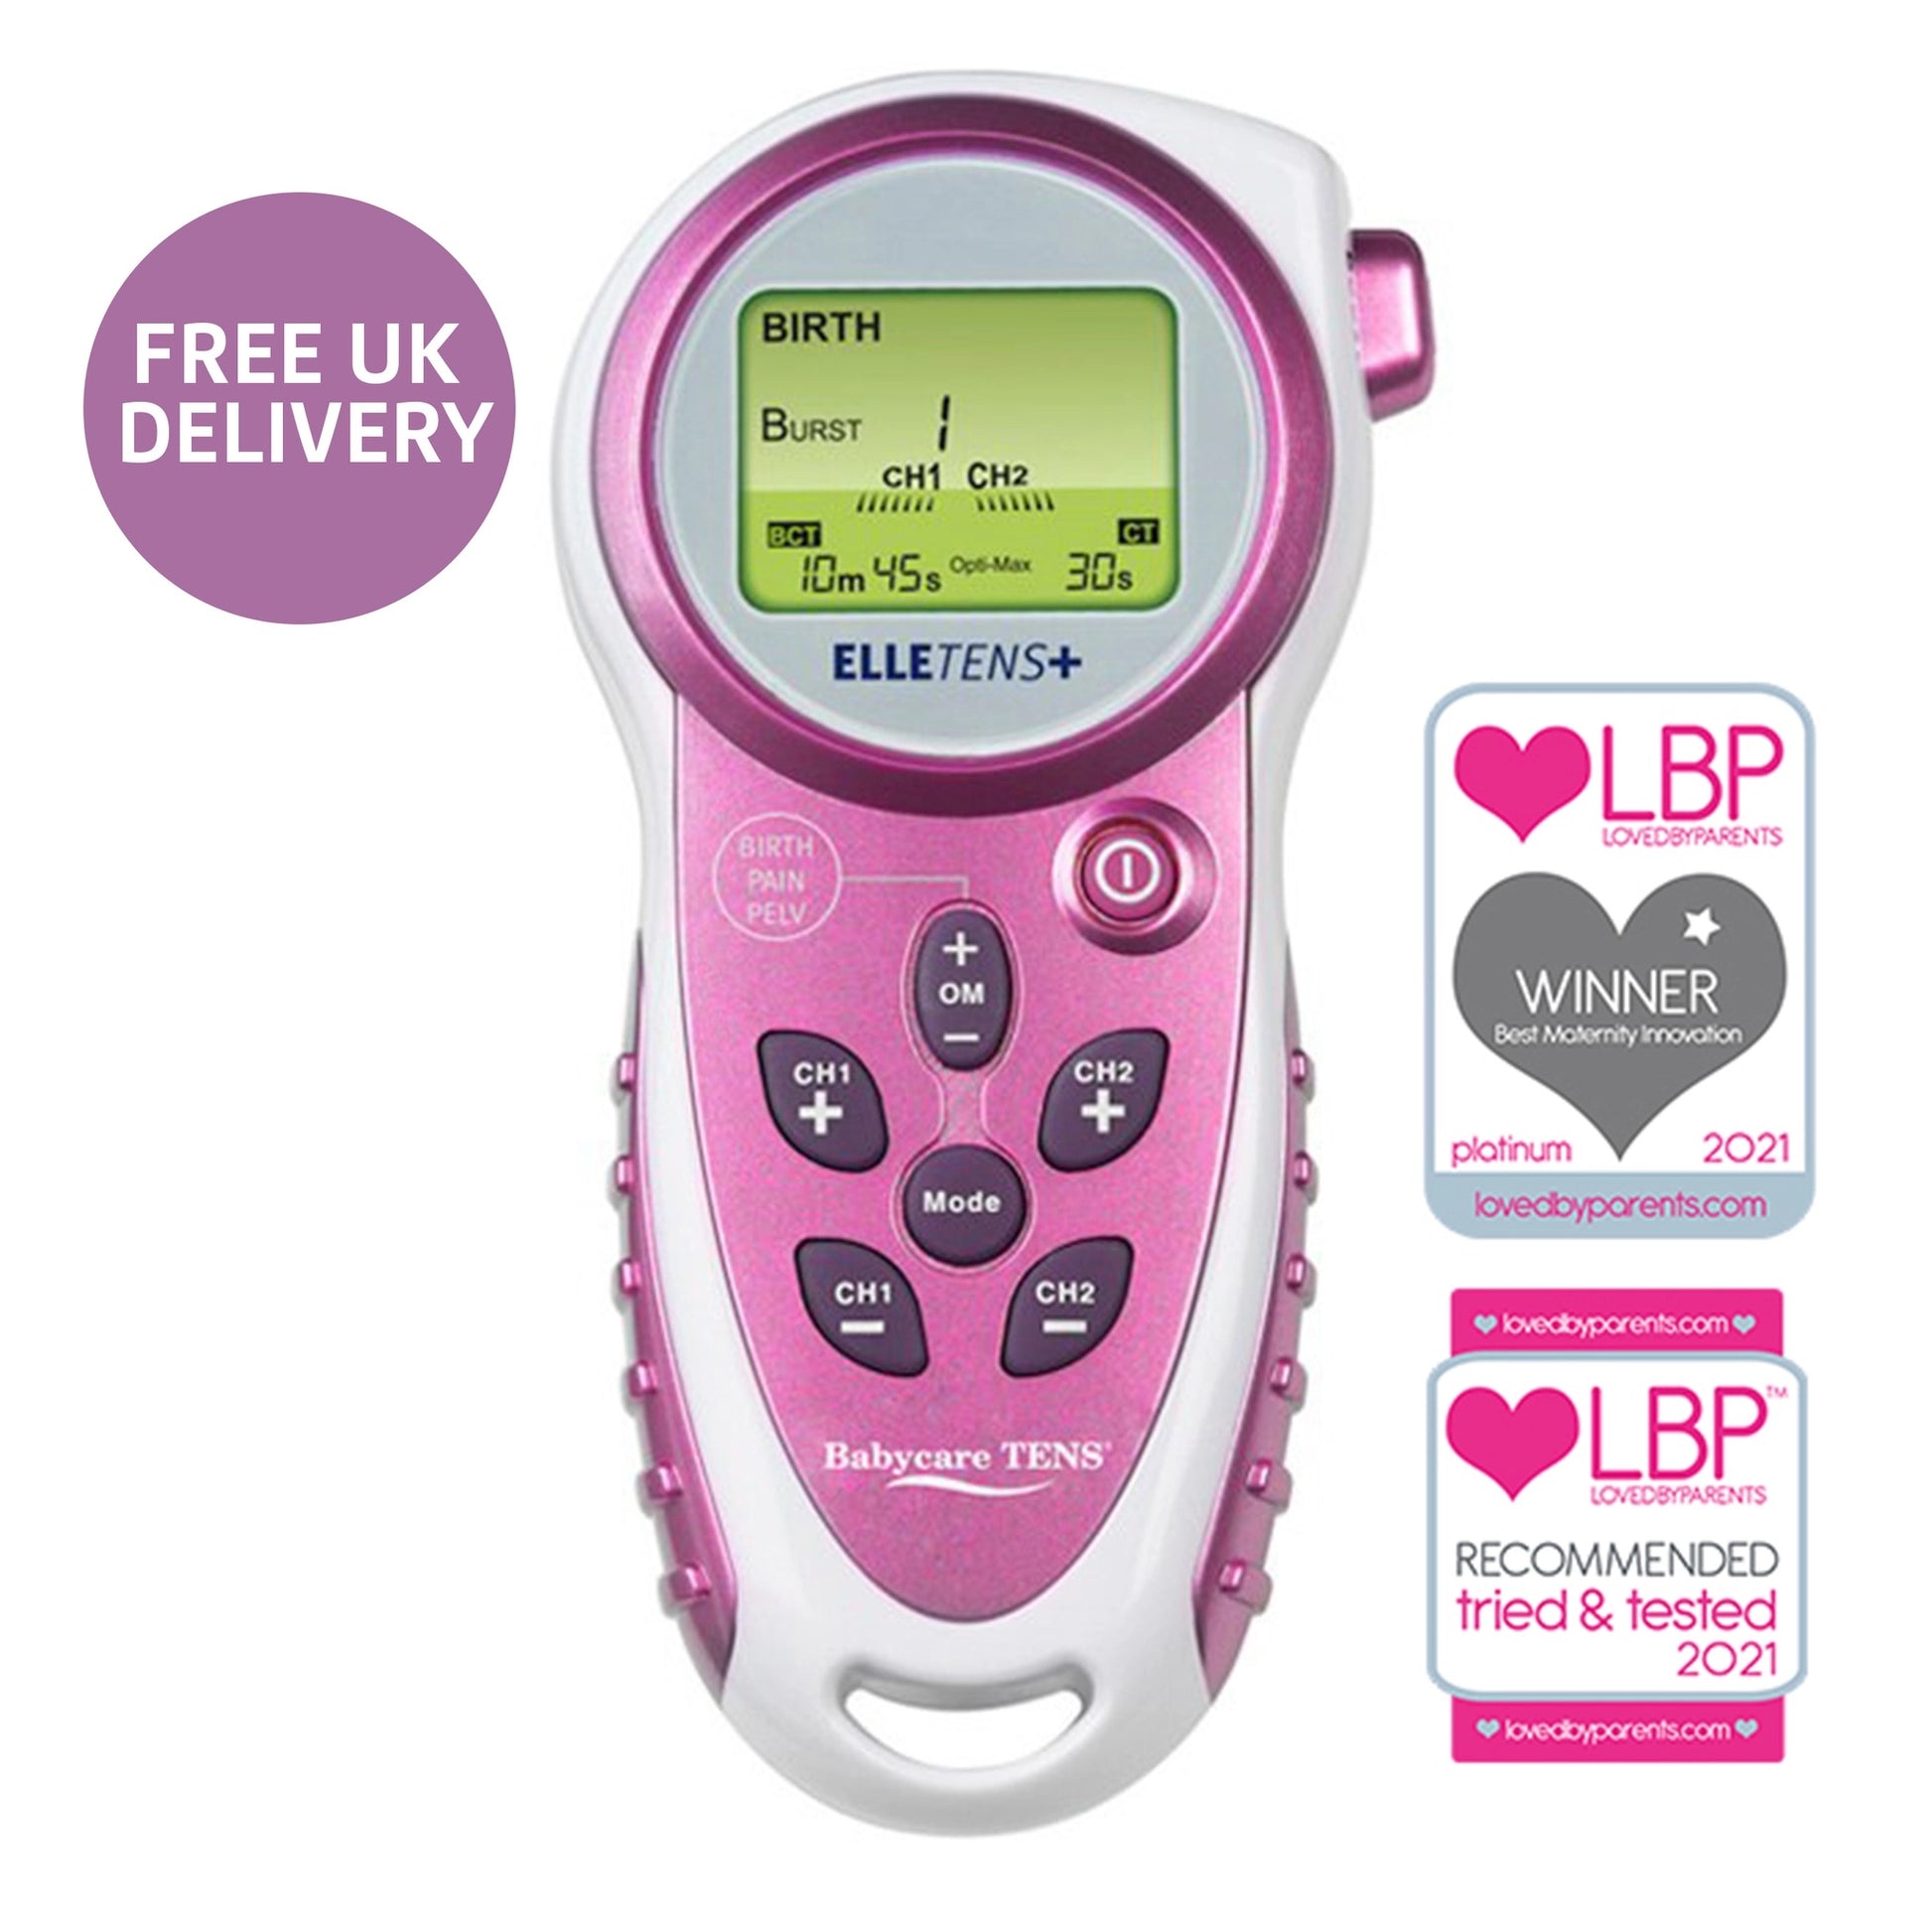 Image shows Babycare Tens Elle Plus + machine handset with free UK delivery. Awards for Winner of Best Maternity Innovation and Loved By Parents award tried and tested 2021